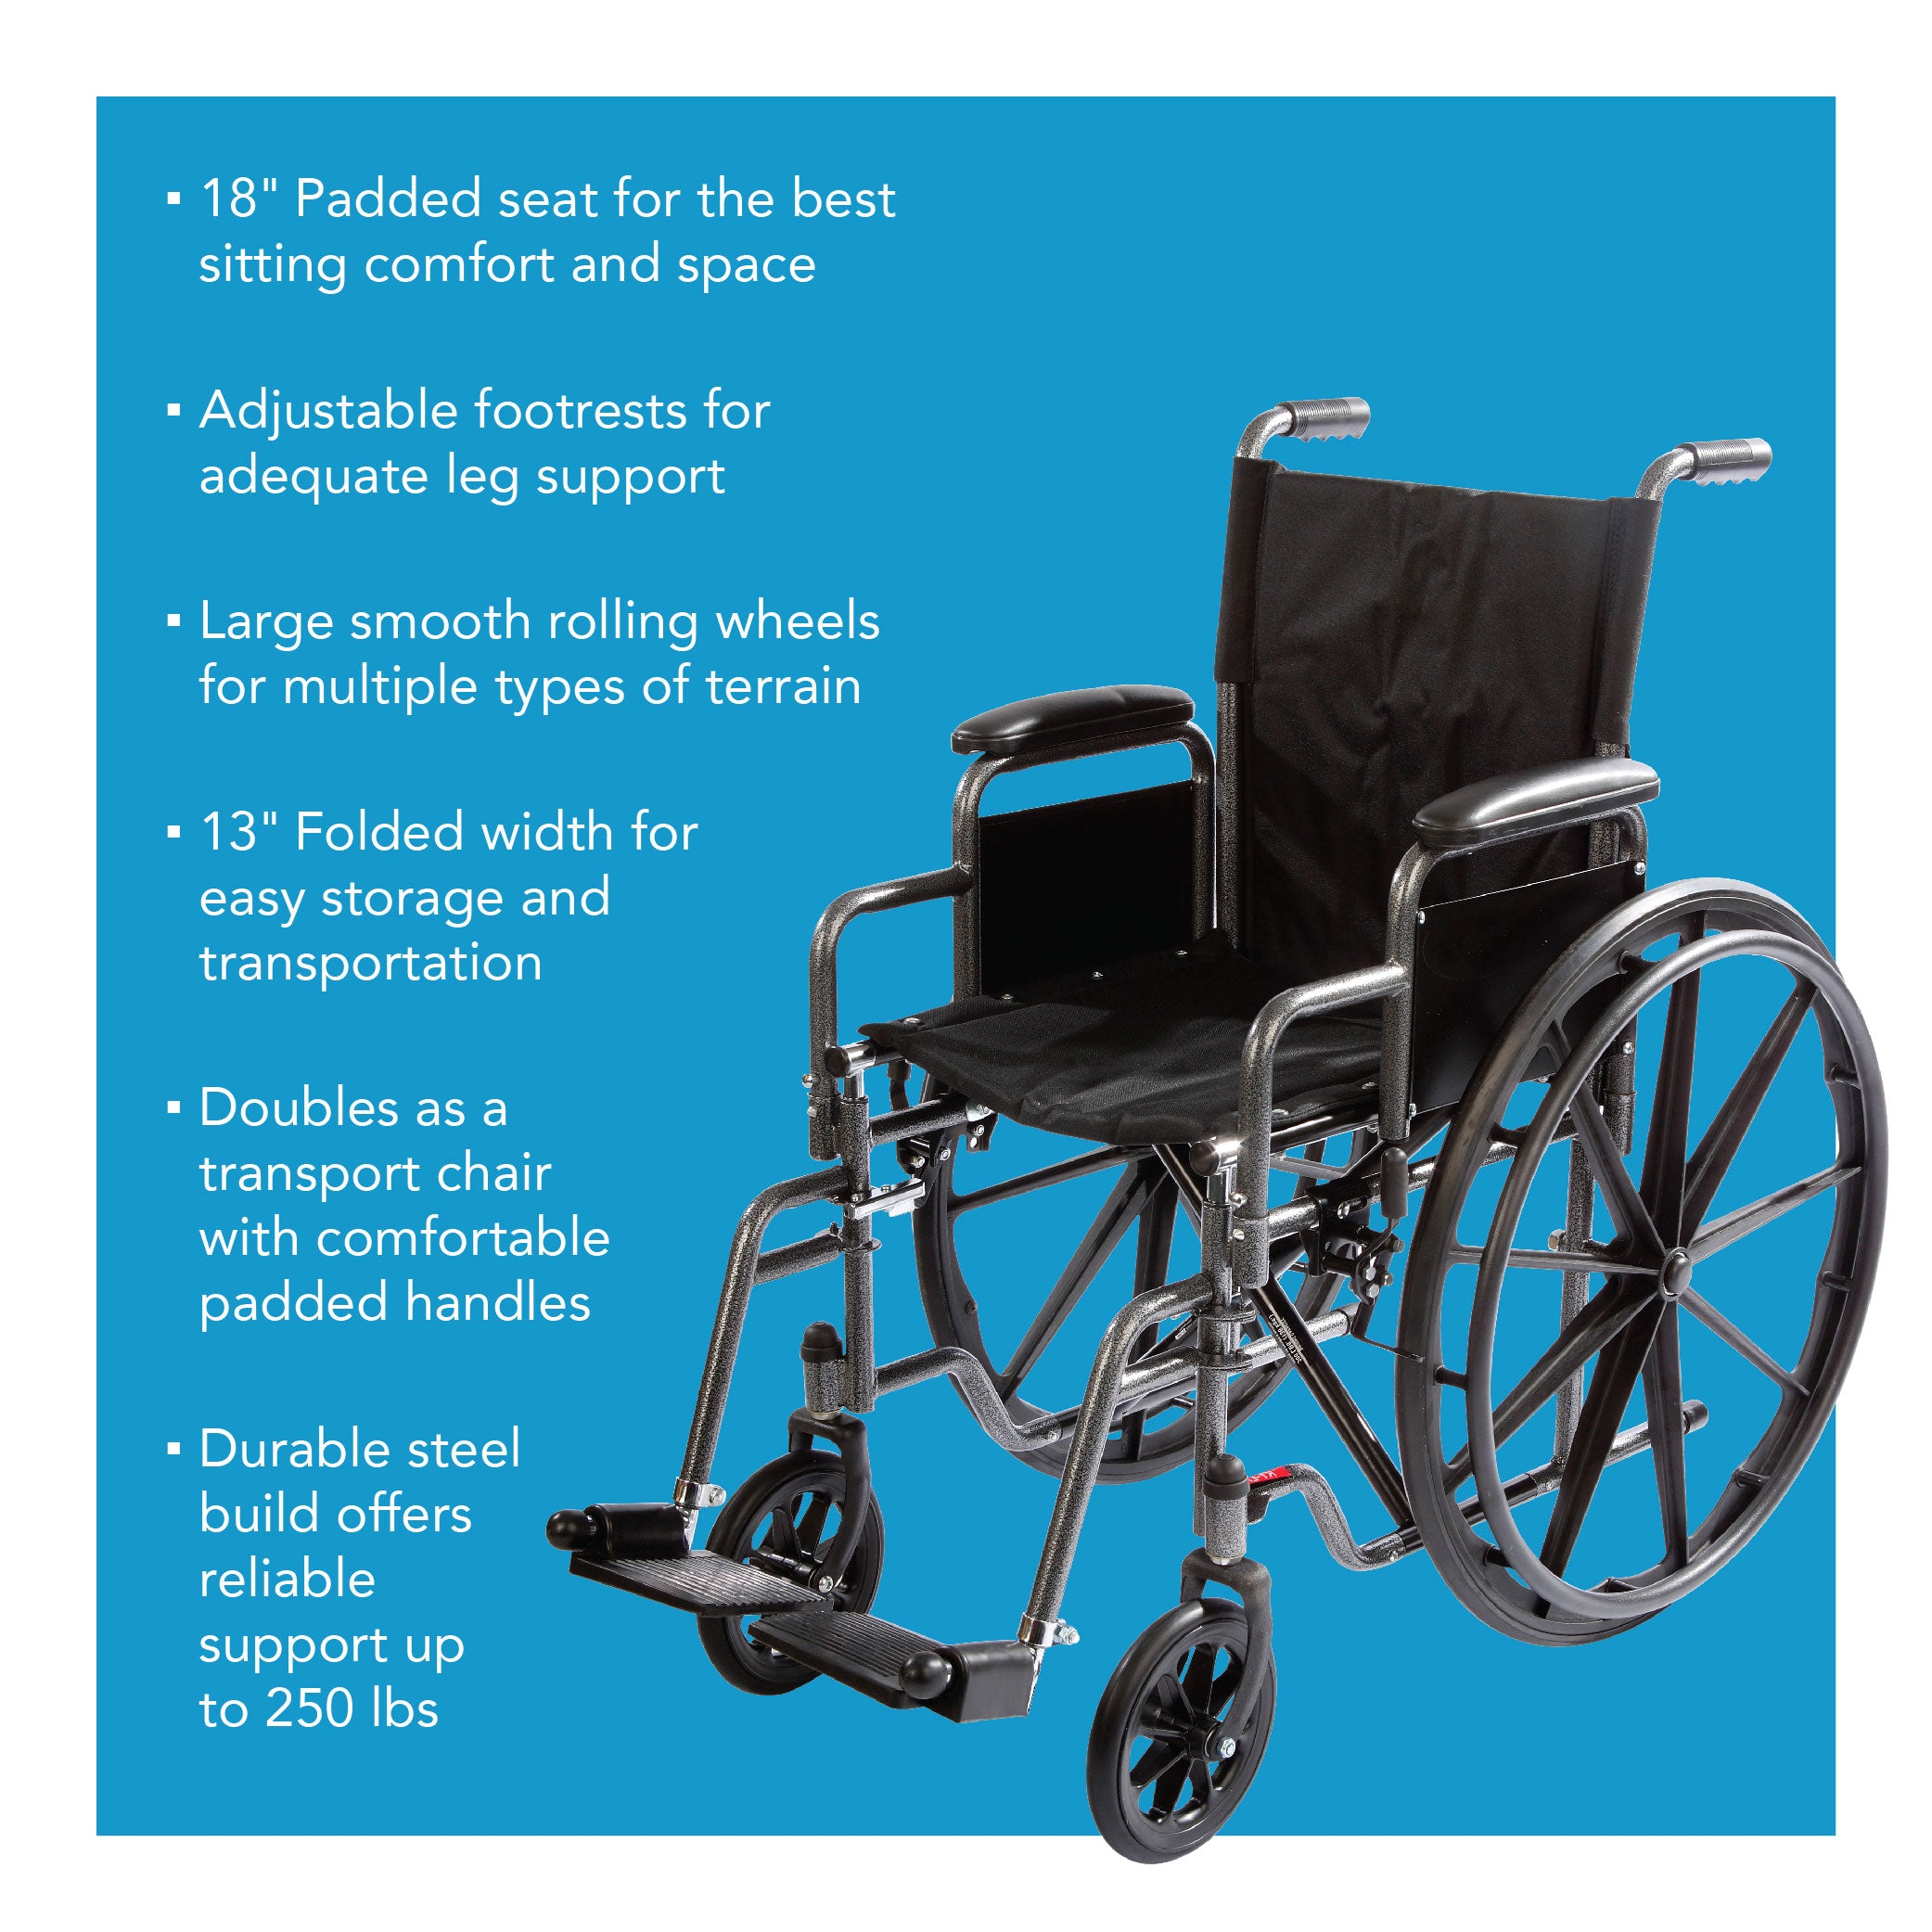 Enhancing Comfort: Wheelchair Cushions for Optimal Support